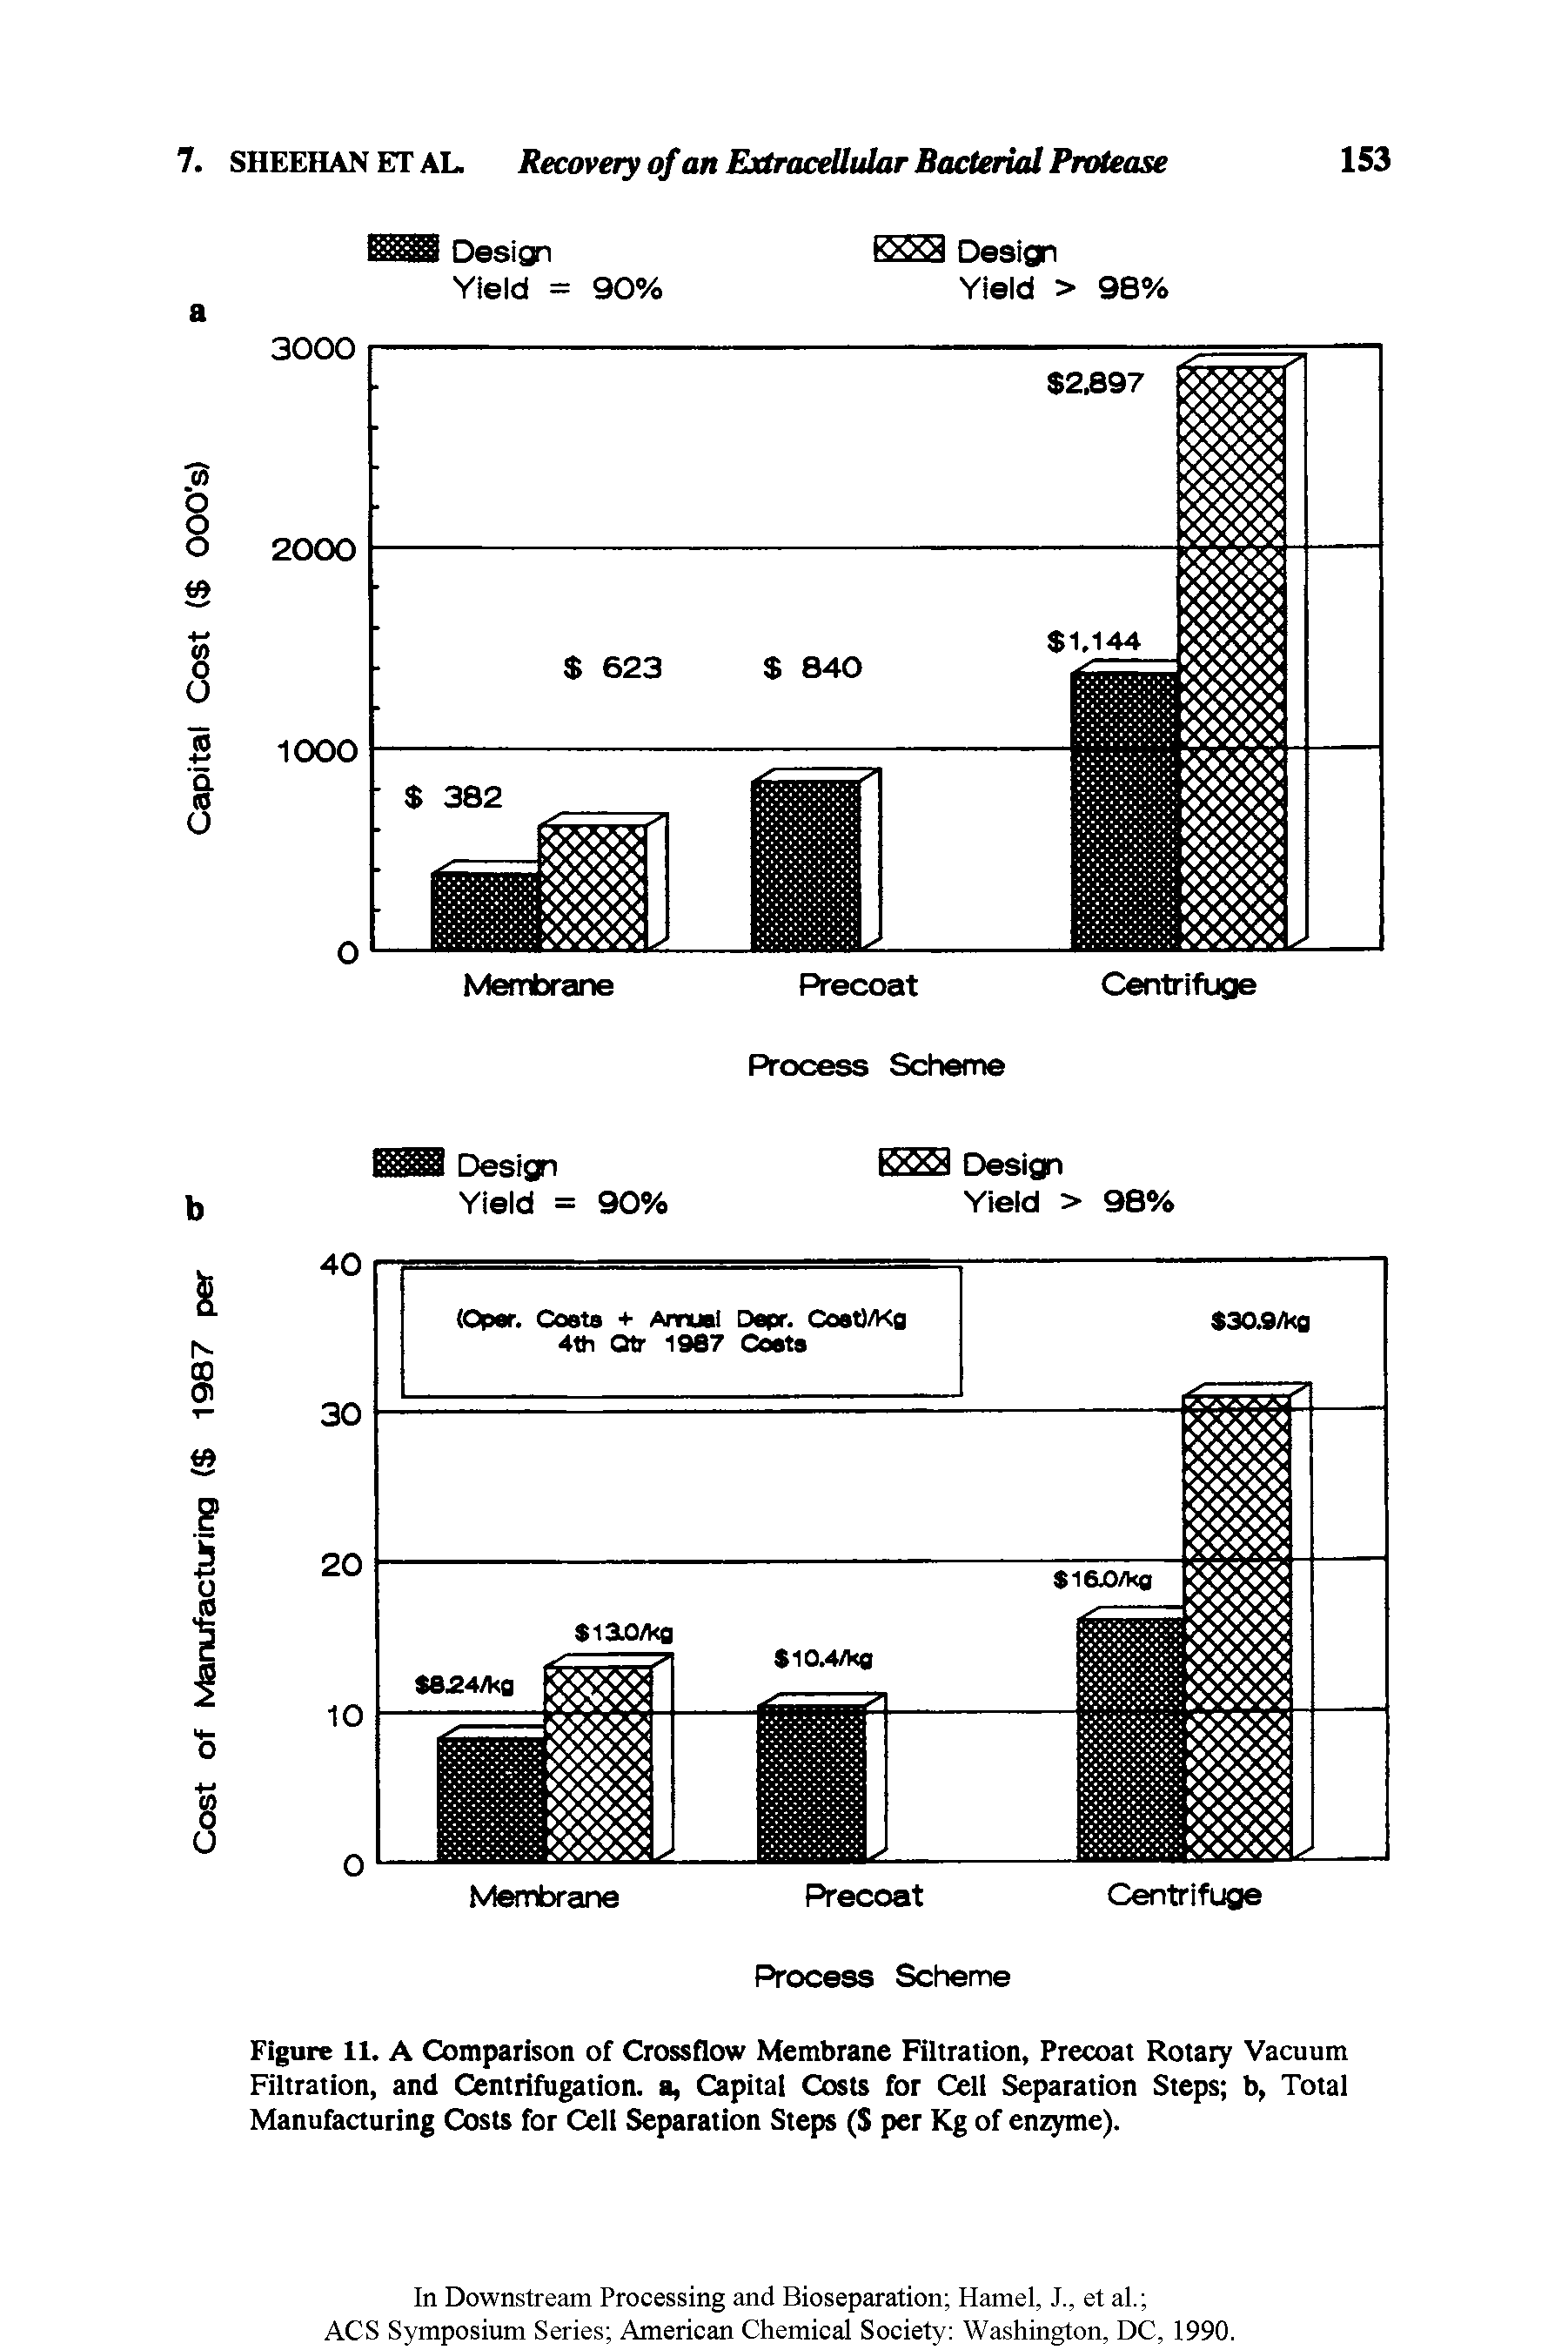 Figure 11. A Comparison of Crossflow Membrane Filtration, Precoat Rotary Vacuum Filtration, and Centrifugation, a, Capital Costs for Cell Separation Steps b, Total Manufacturing Costs for Cell Separation Steps (S per Kg of enzyme).